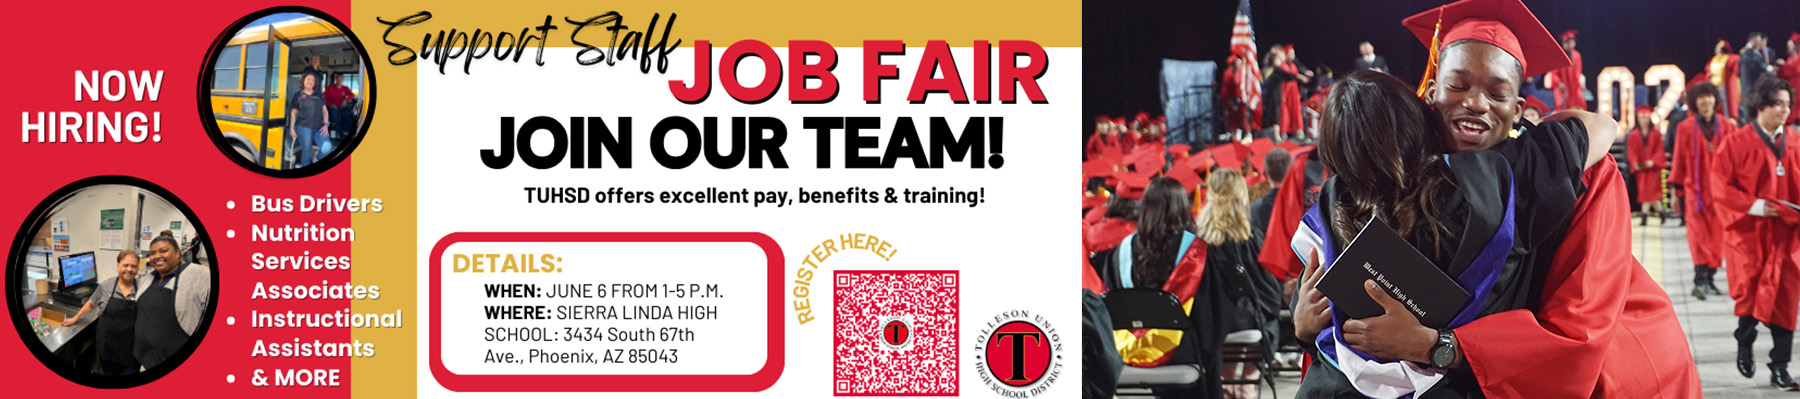 TUHSD Job Fair- we offer excellent pay, benefits, & training! Hiring bus drivers, nutrition services associates, instructional assistants & more. June 6 from 1-5 pm at Sierra Linda HS in Phoenix, AZ 85043 | Students wearing black outsi